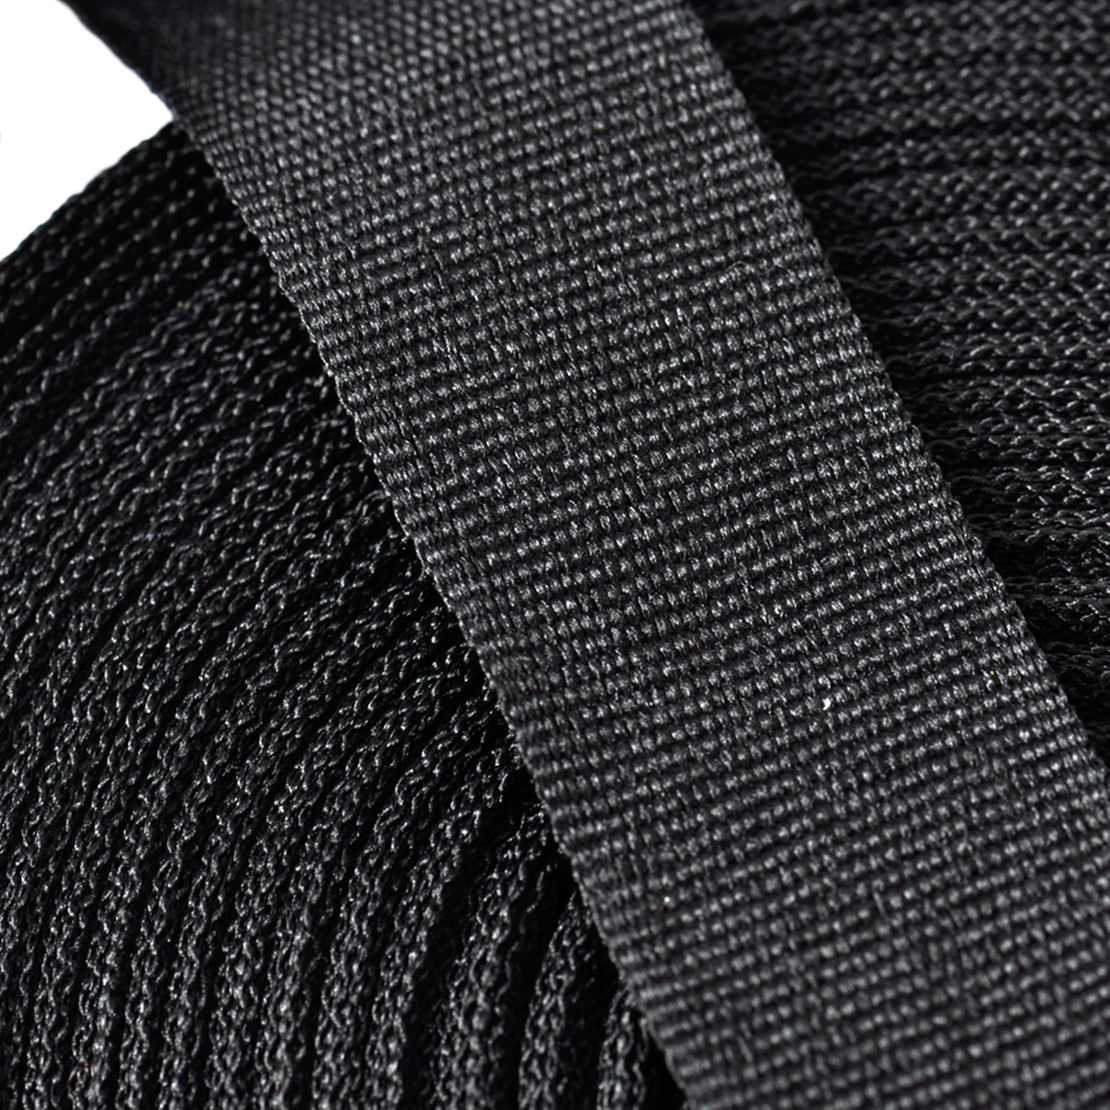 LETAOSK NEW Nylon Strap Webbing Camping Strapping 10 Yards Length 1 inch Width